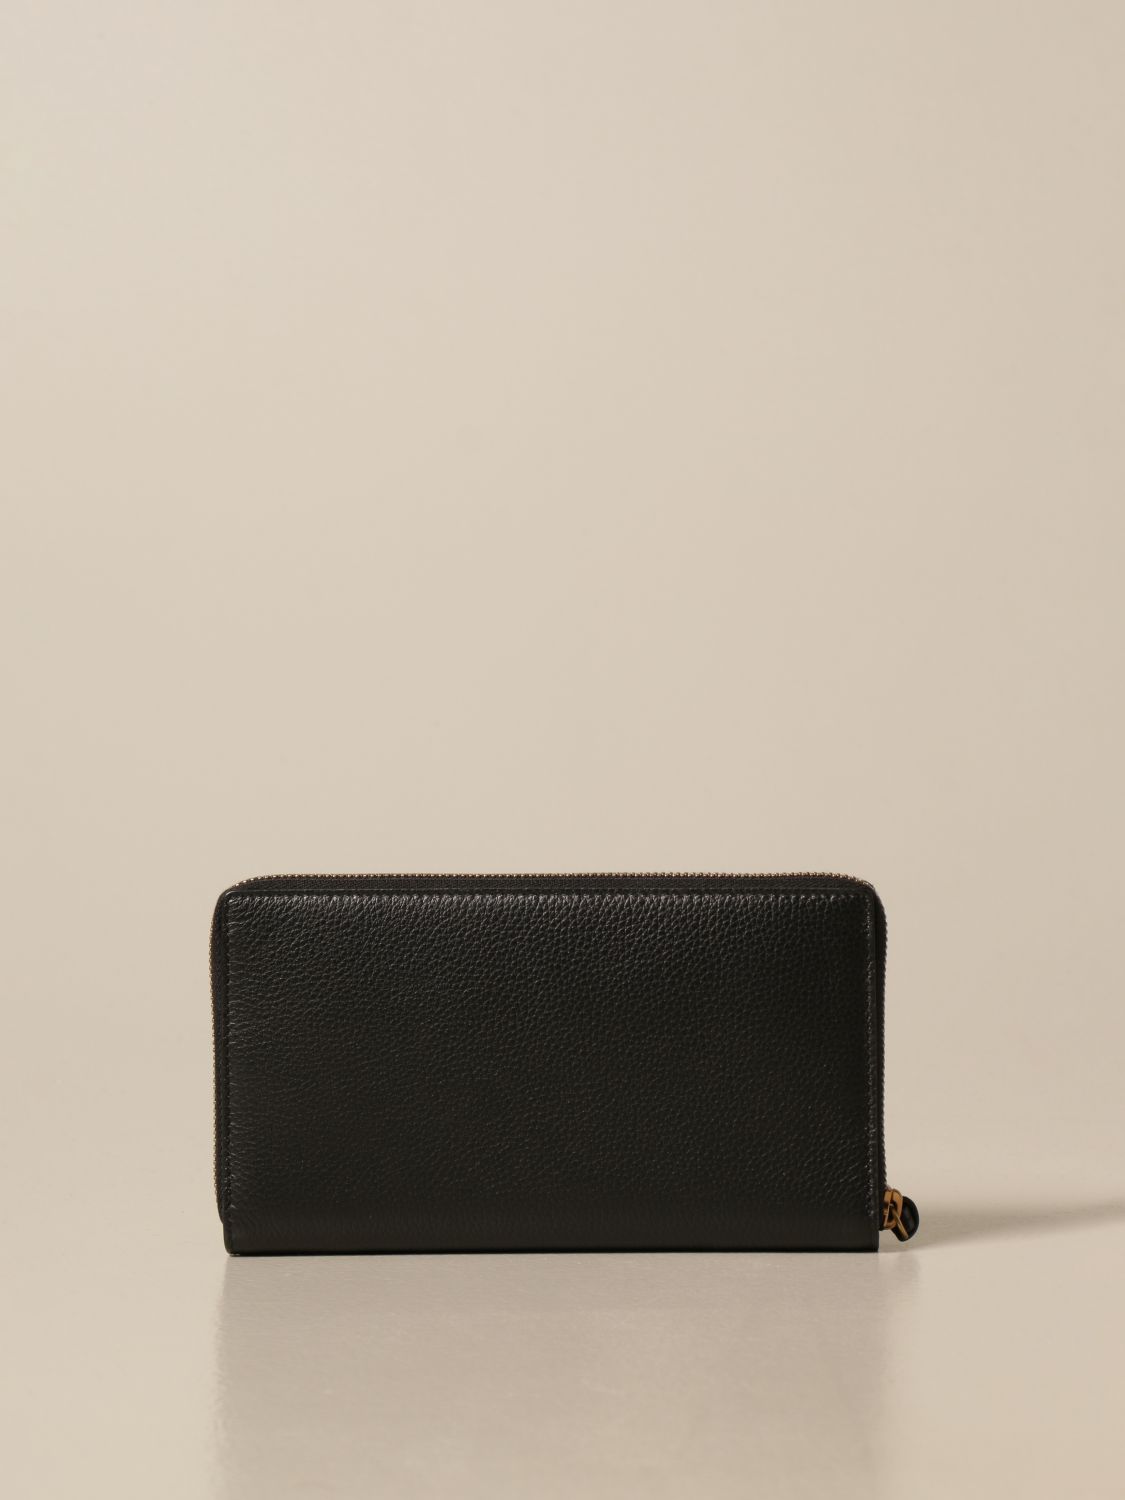 Khaki/black grained Neo Capsule 6-card wallet - Leather Goods